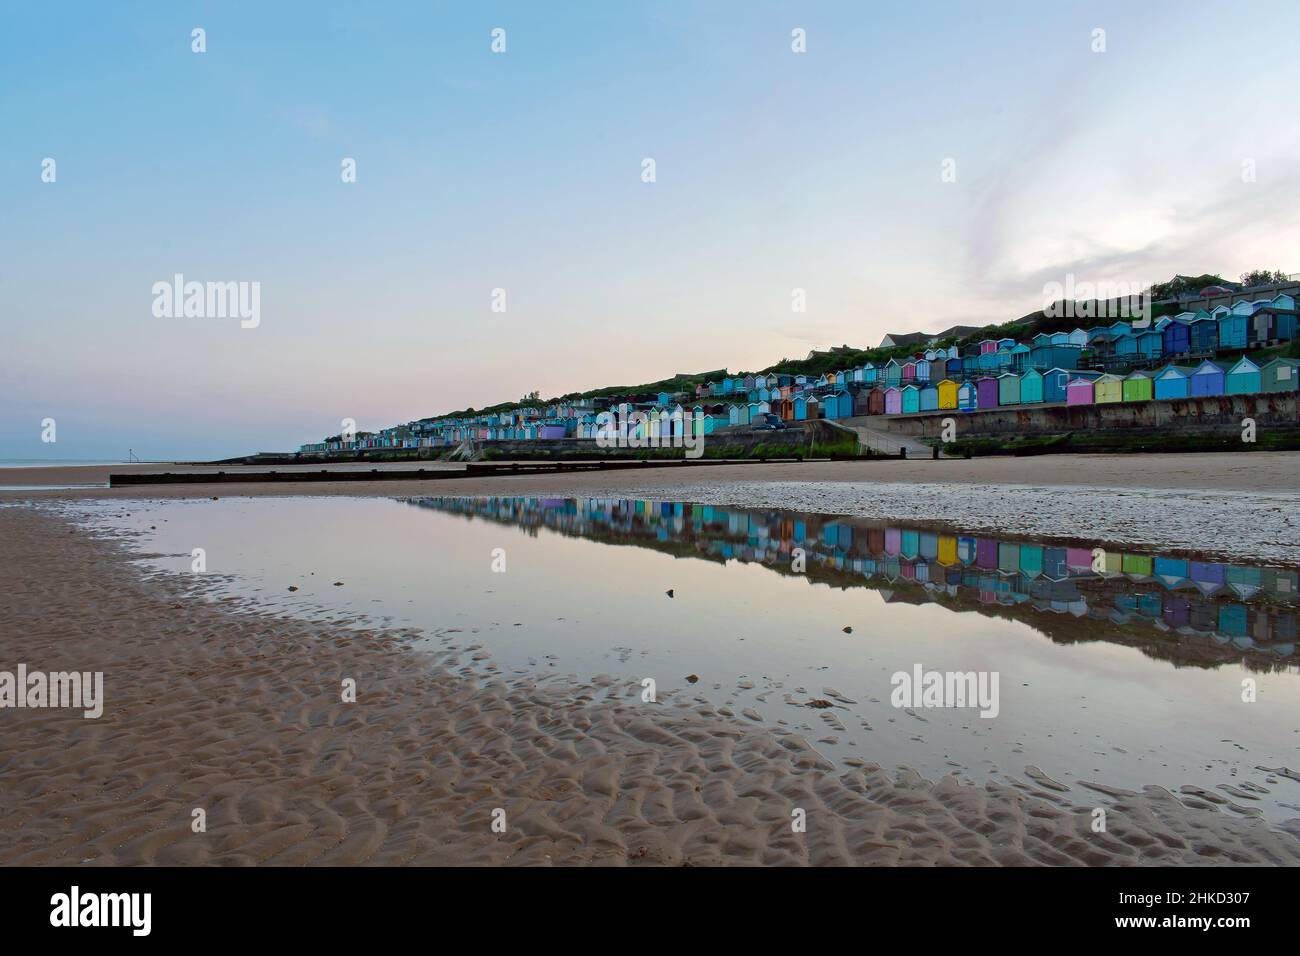 Colourful beach huts line the promenade of Walton-On-The-Naze, North Essex coastline, UK. Reflections created in pools left behind at low tide. Stock Photo